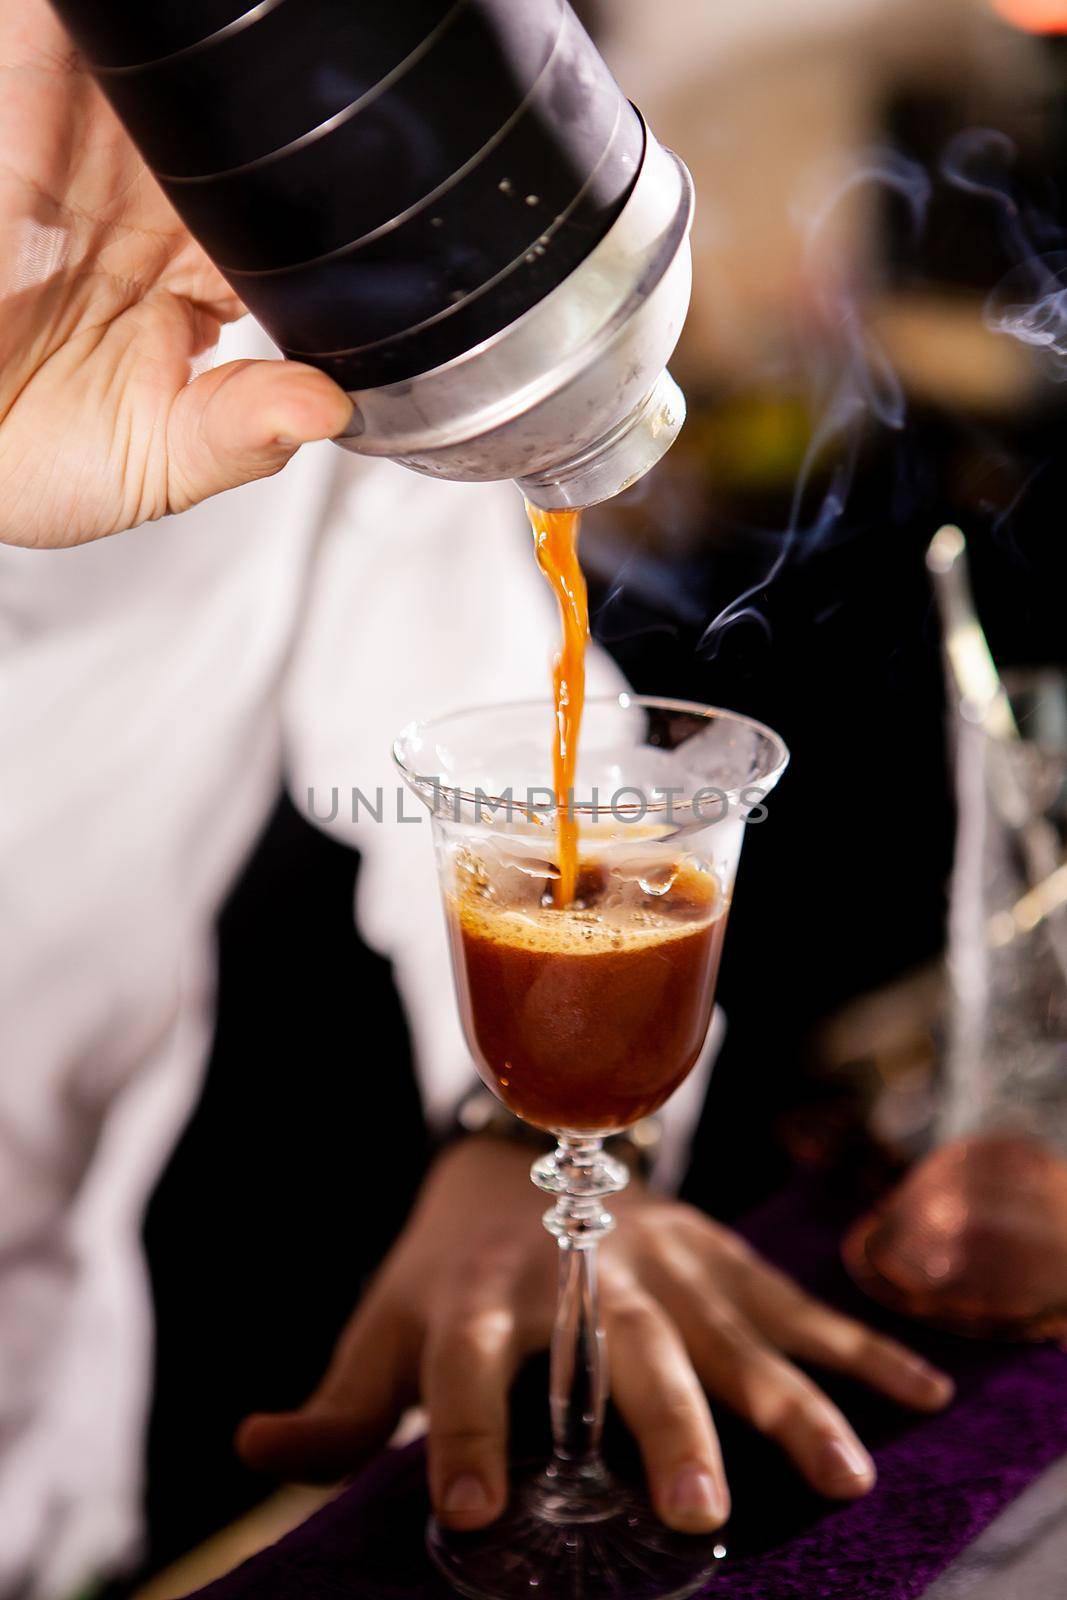 Barman making alcohol coffe drink.Pouring drink